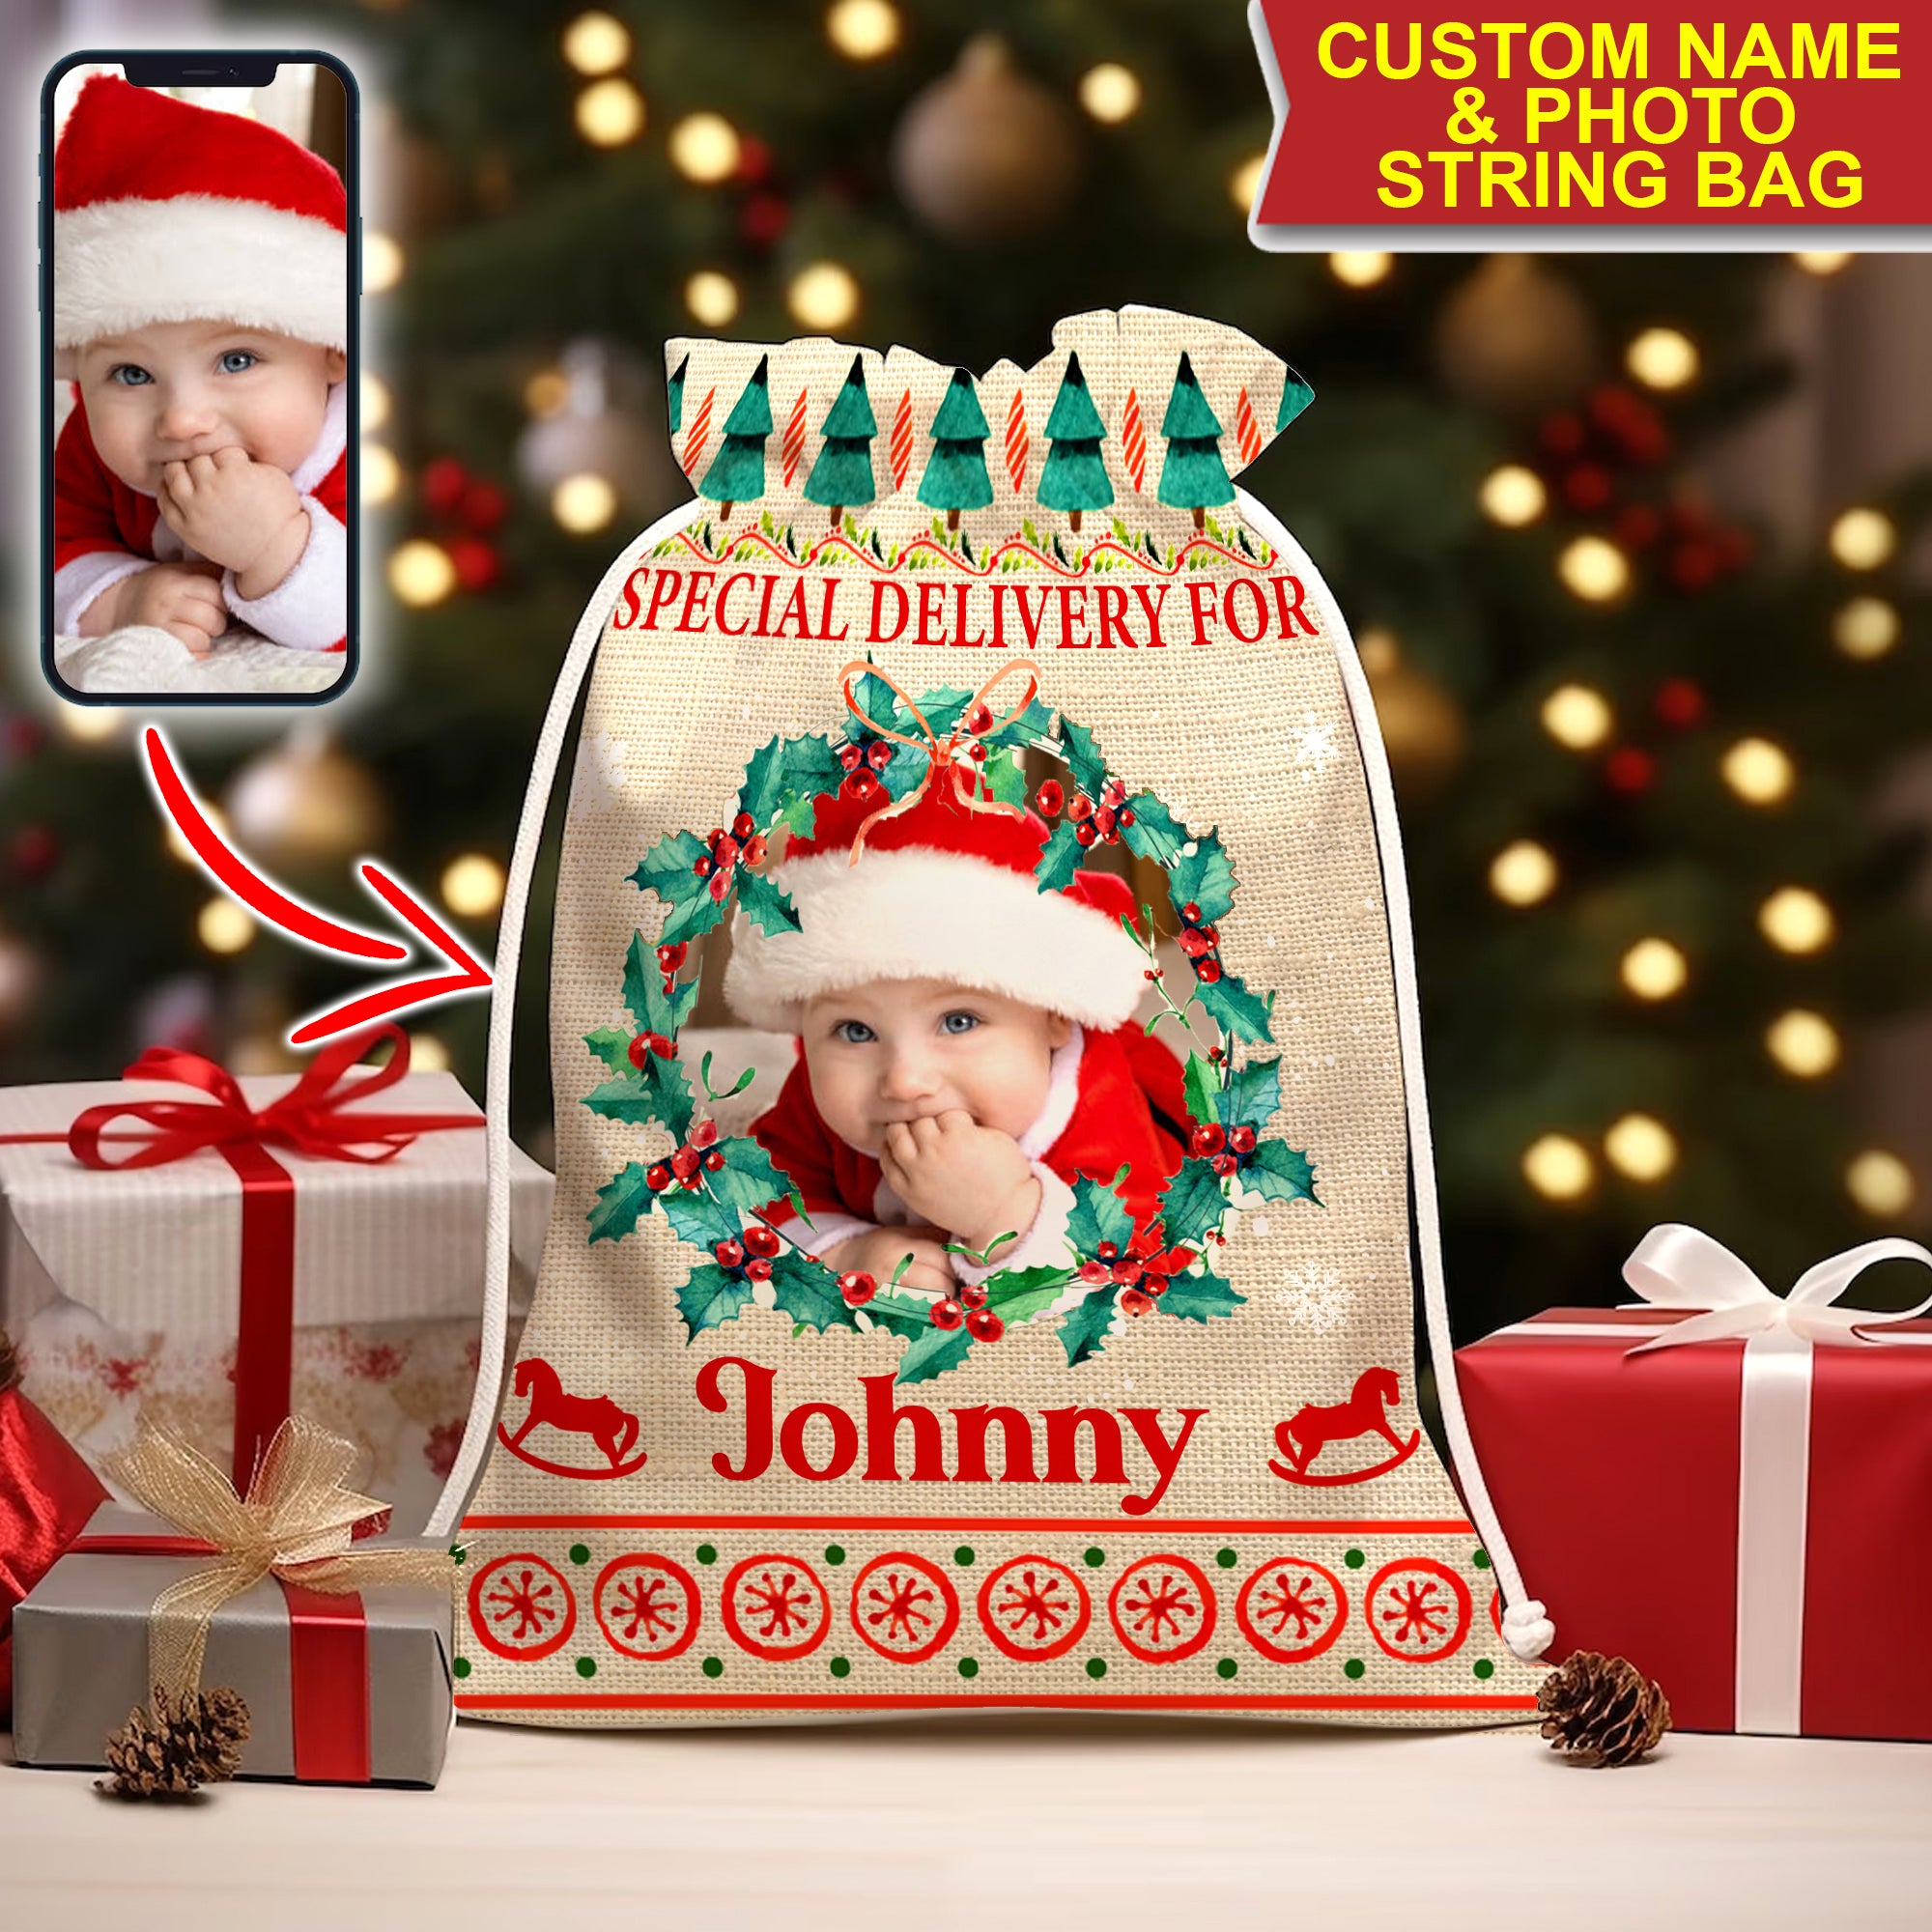 Special Delivery For Kid - Personalized Photo And Name String Bag, Christmas Gift, Gift For Family